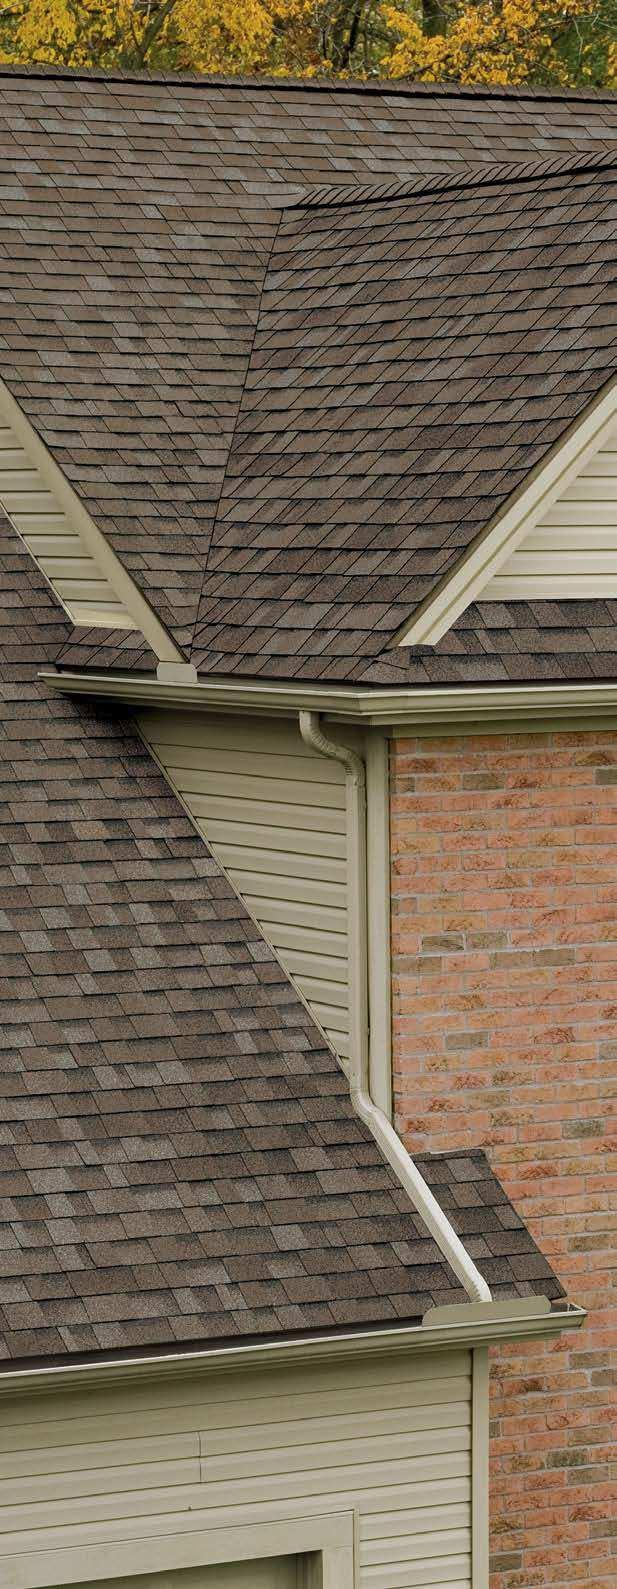 Oakridge Shingles Make it your own. When does a house become a home? When the place you live in begins to relect the life you re living.